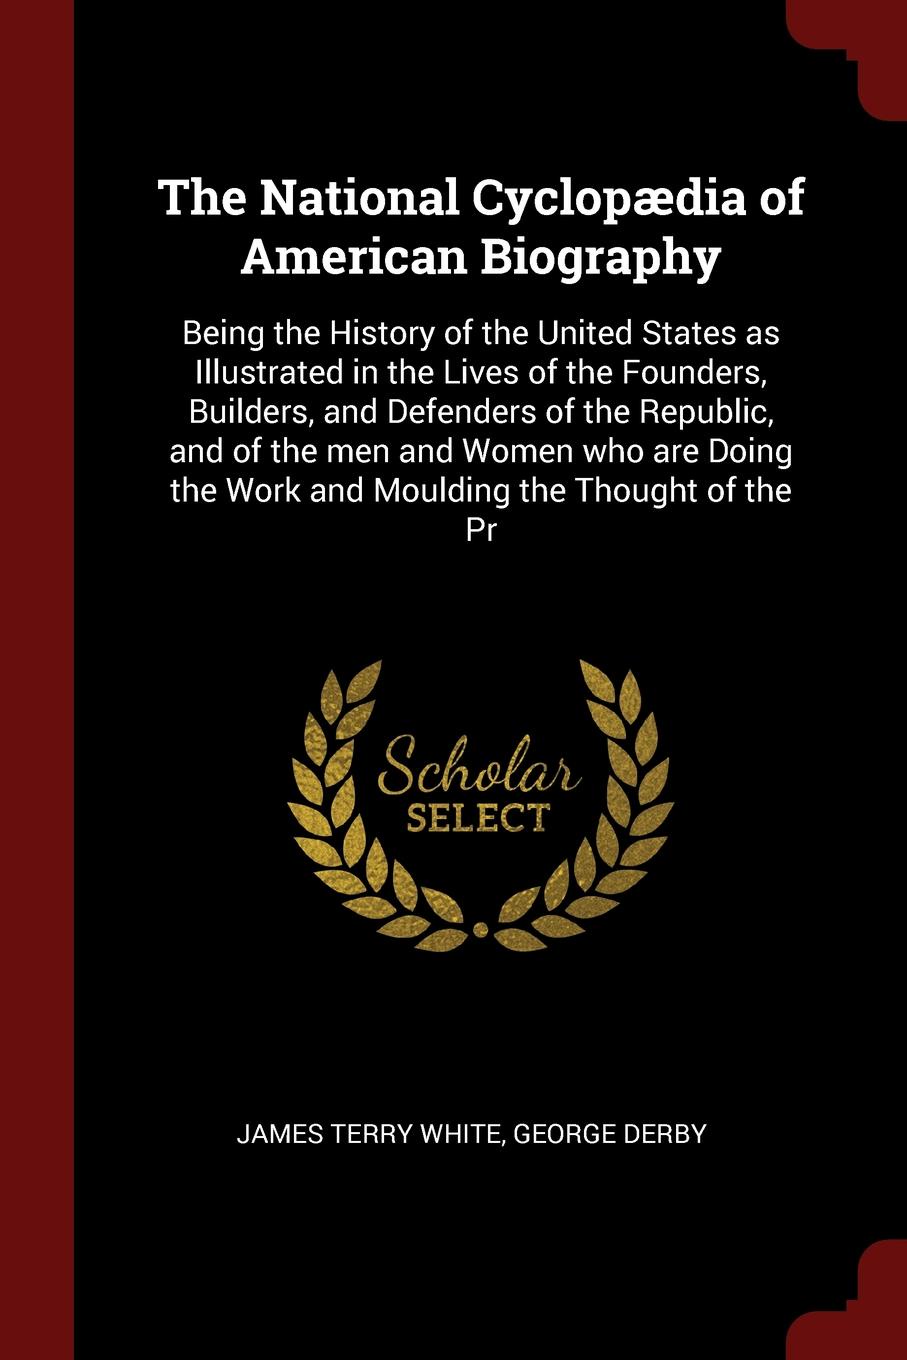 The National Cyclopaedia of American Biography. Being the History of the United States as Illustrated in the Lives of the Founders, Builders, and Defenders of the Republic, and of the men and Women who are Doing the Work and Moulding the Thought o...